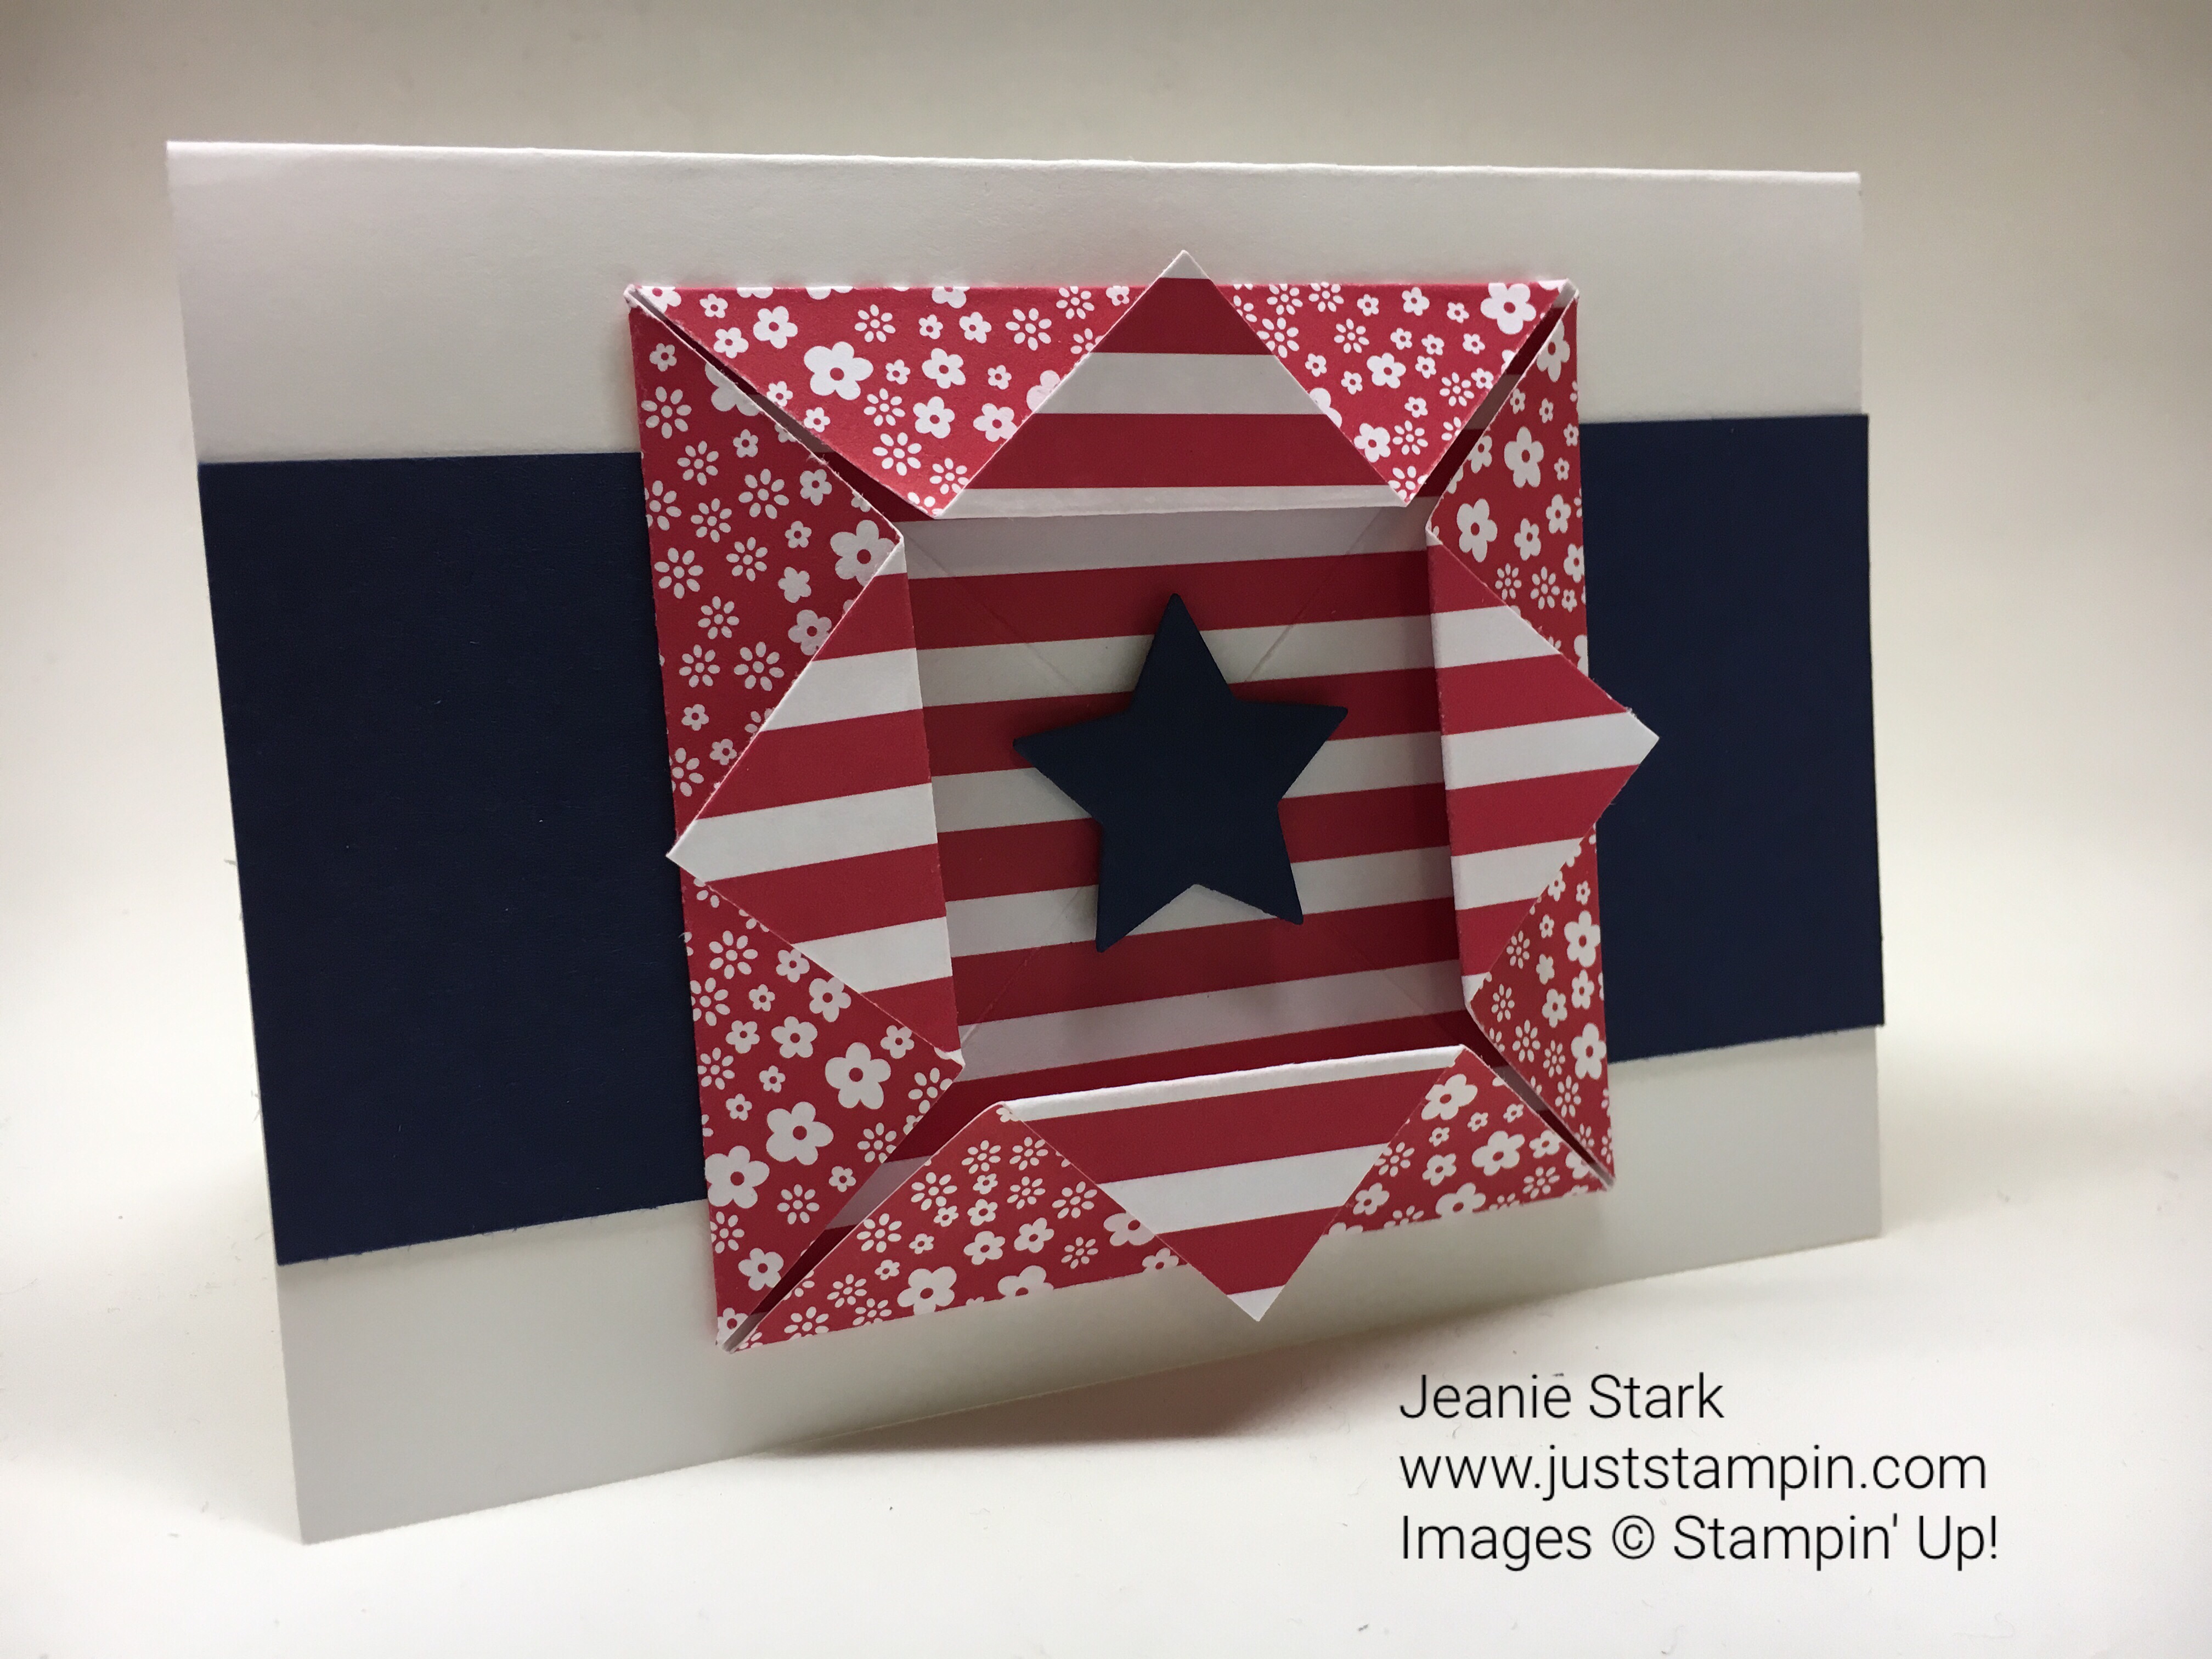 Origami Fun Fold Card. For directions and supplies visit www.juststampin.com